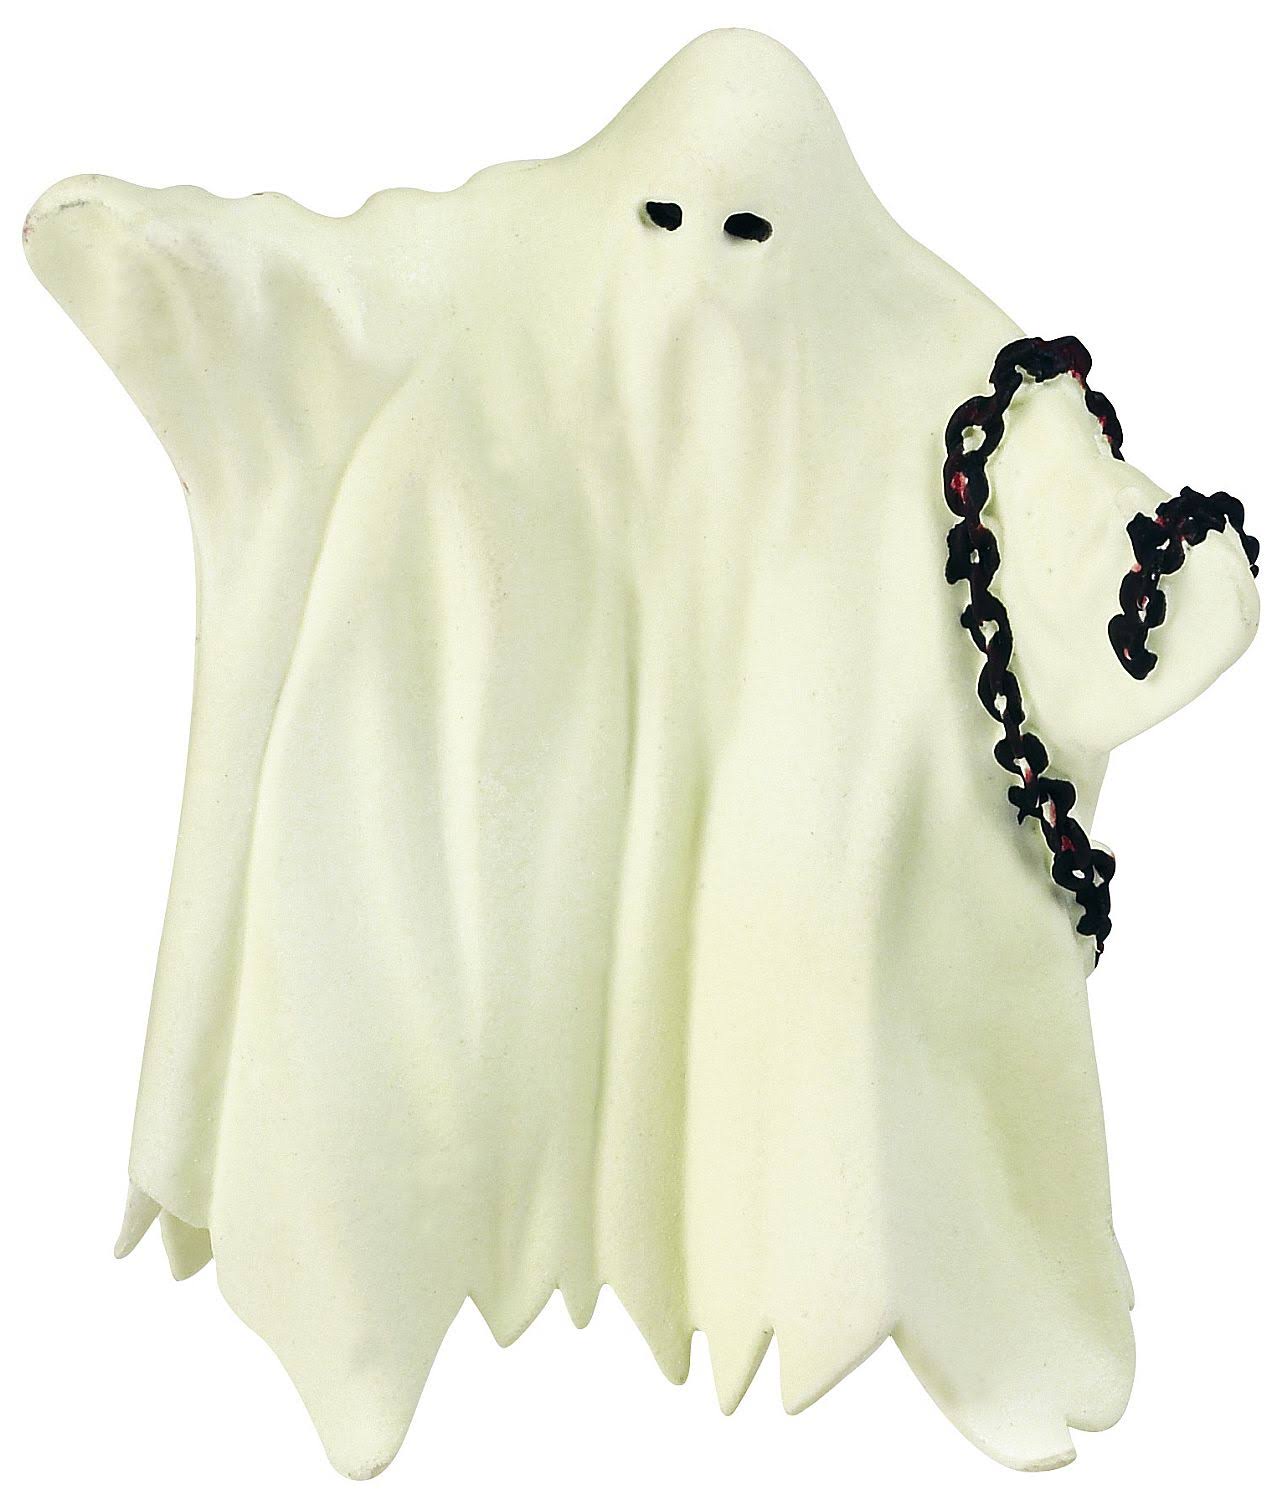 Papo 38903 Ghost Glow in The Dark Figure